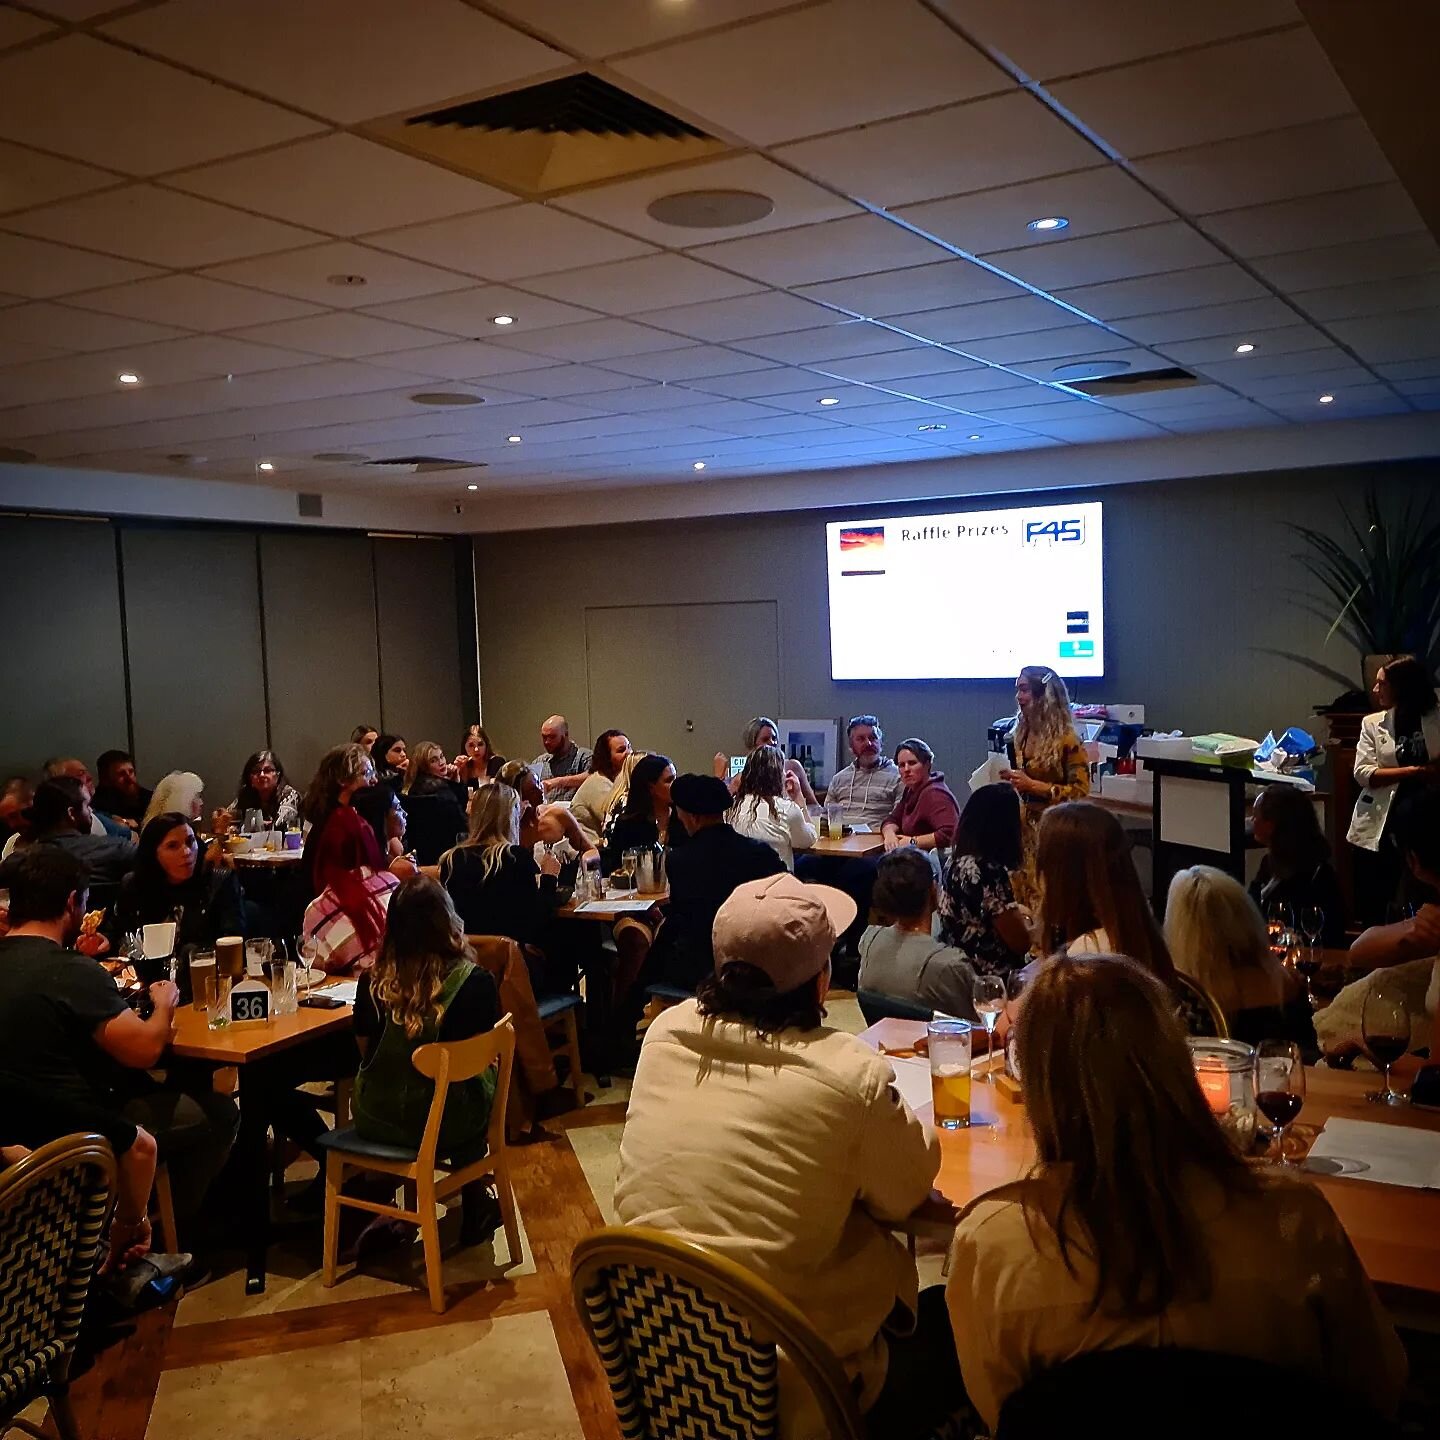 Awesome to have the @f45_vasse quiz night here at Tonic great people and great cause.